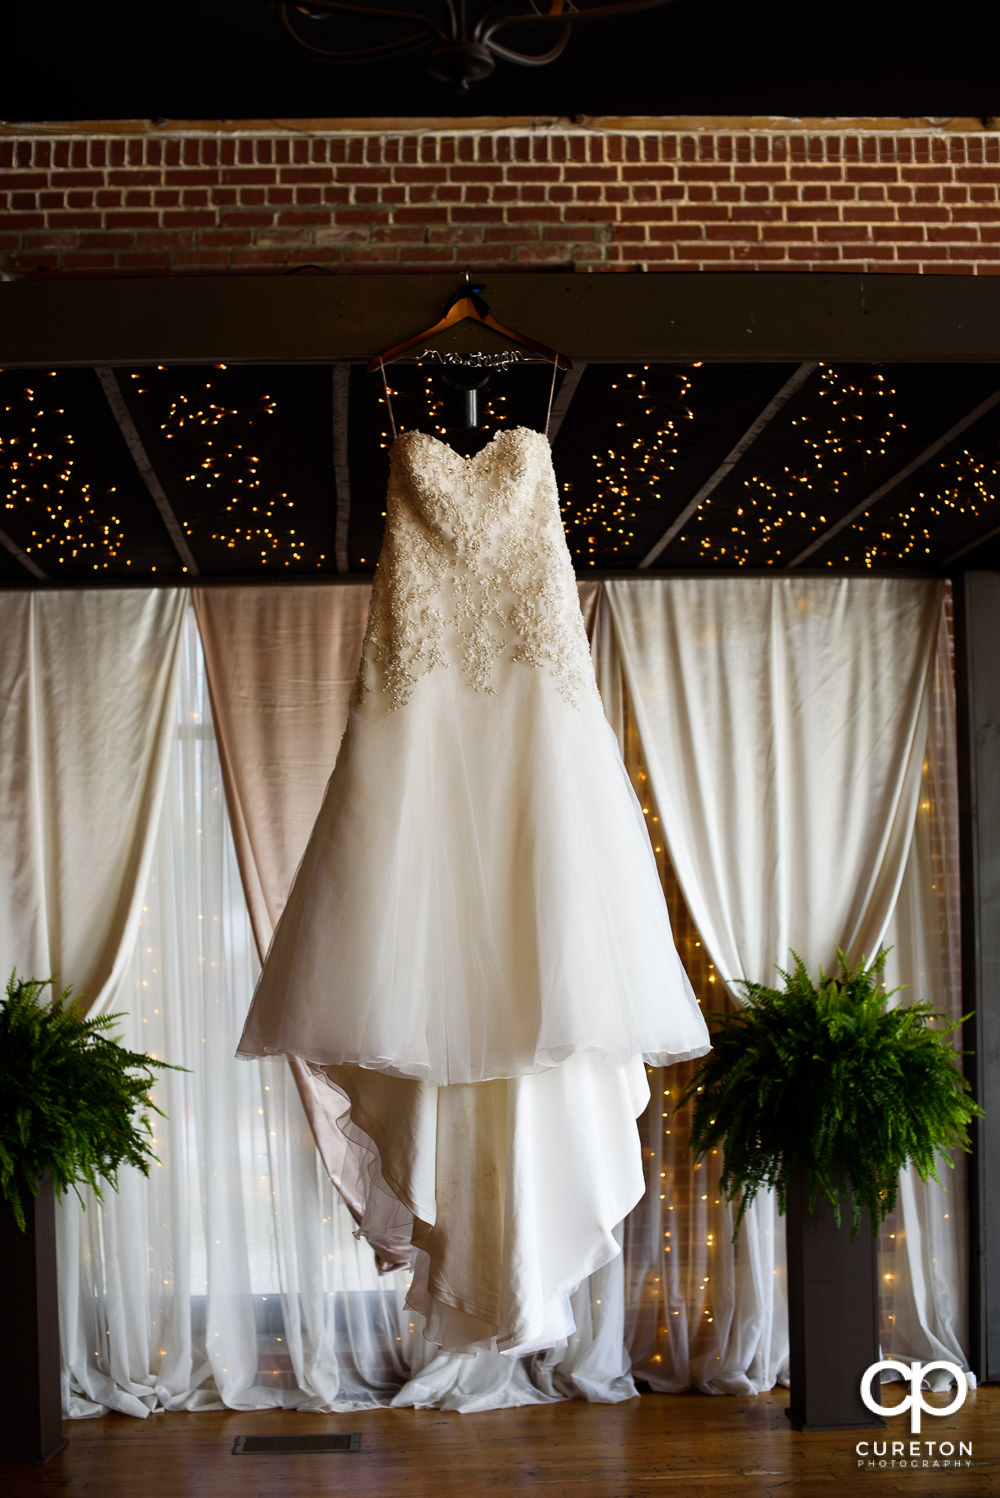 Bride's dress hanging on the alter.